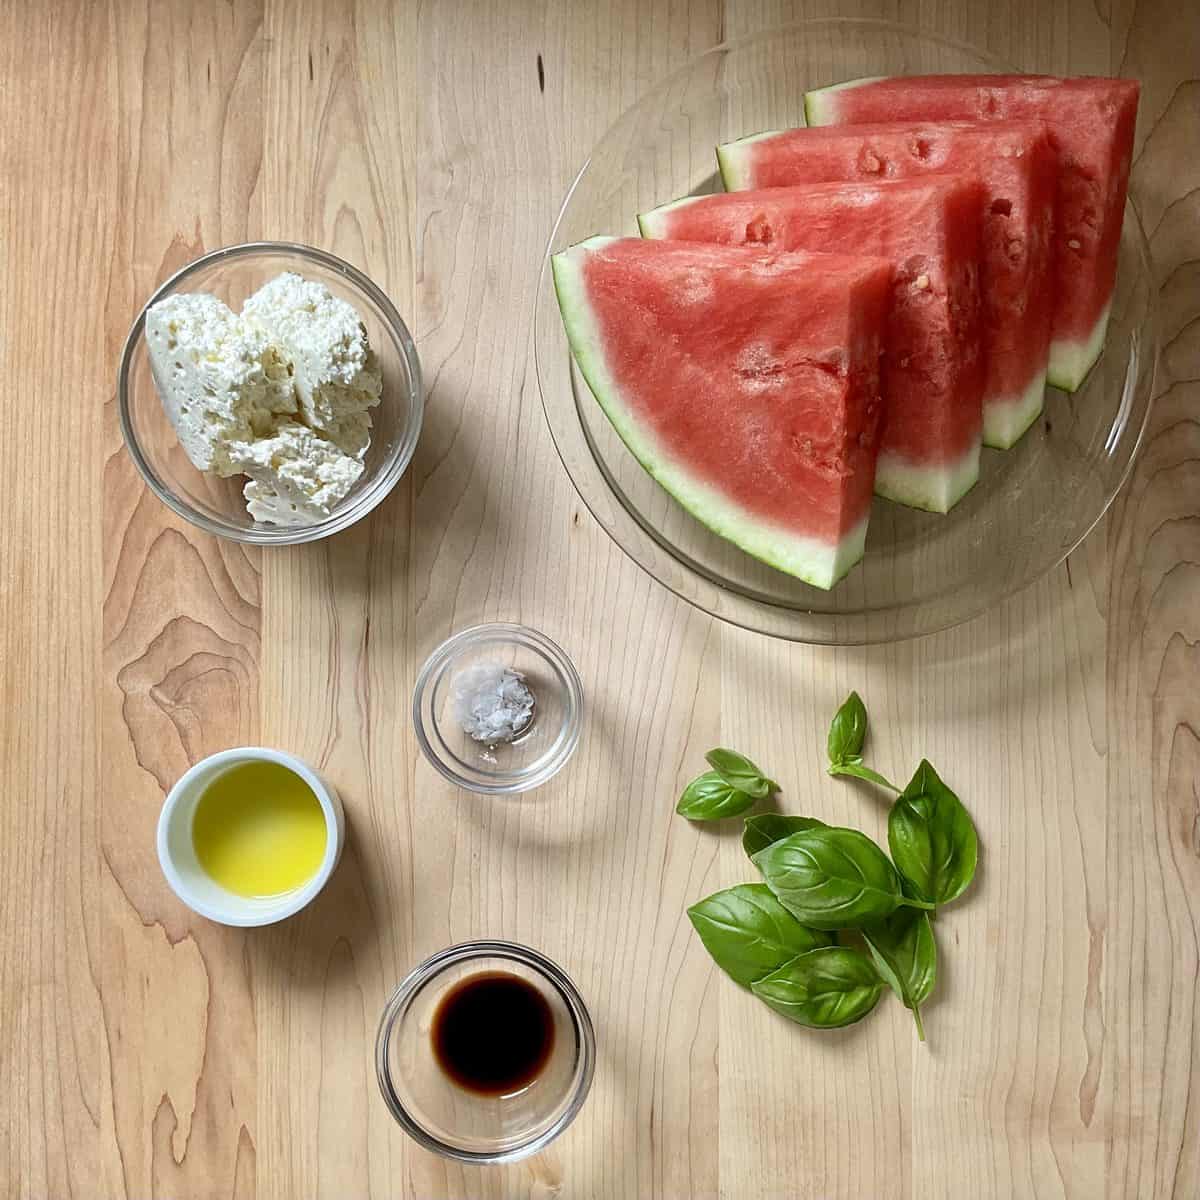 Ingredients to make grilled watermelon steaks on a wooden board.